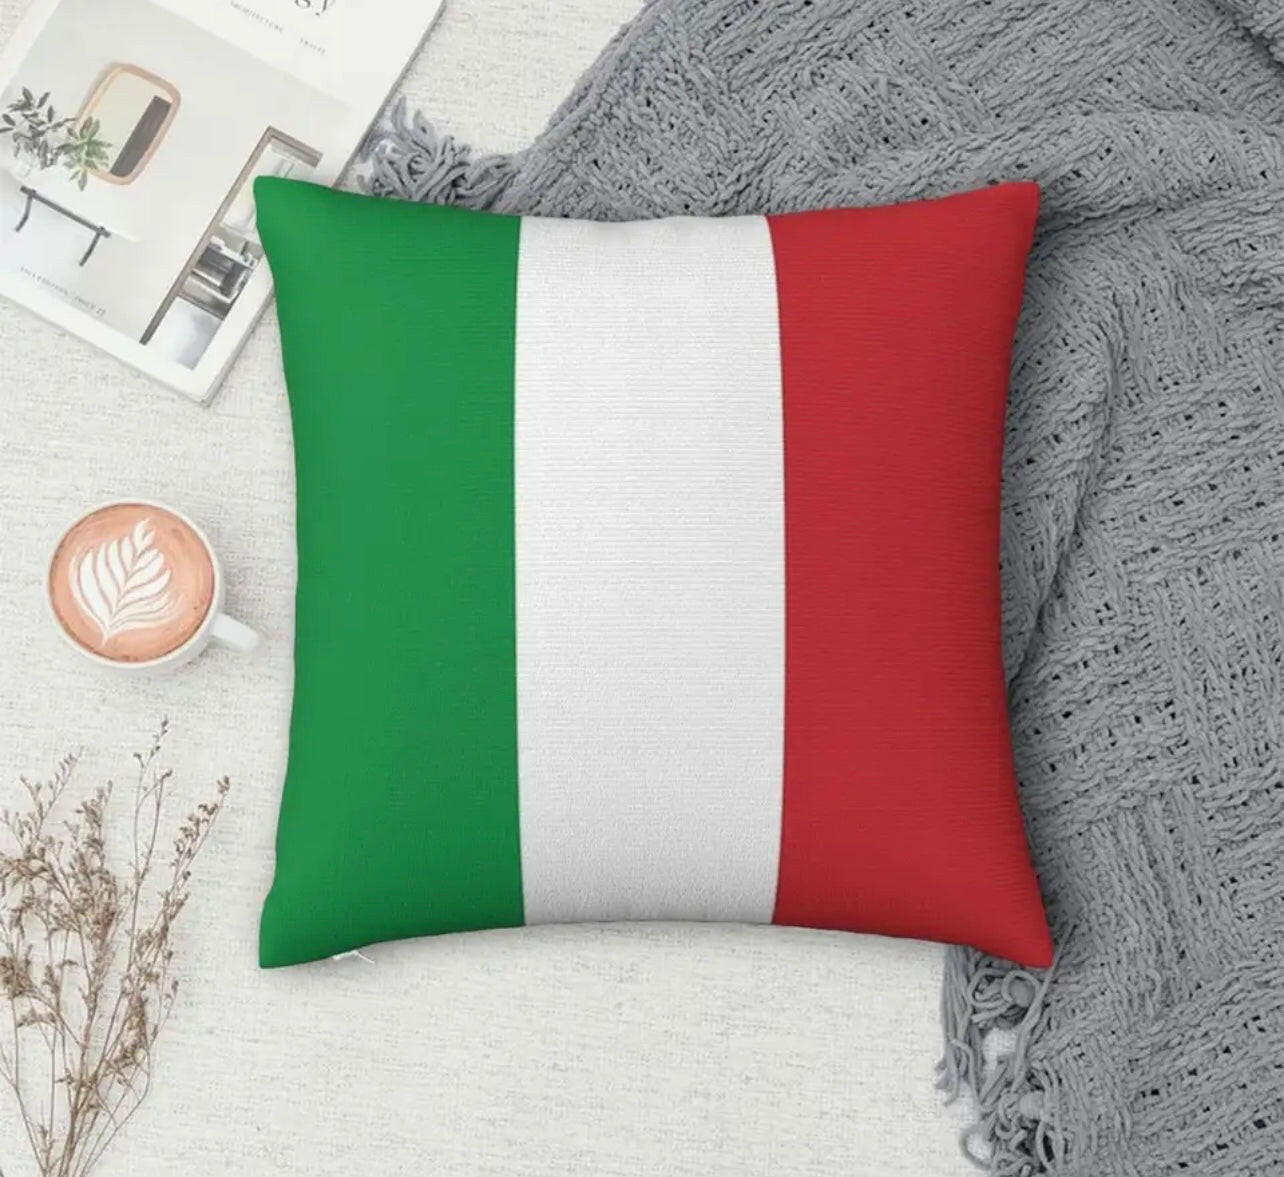 Super Soft Italian Flag Pillow Cover 18 X 18 inches (Pillow insert not included).